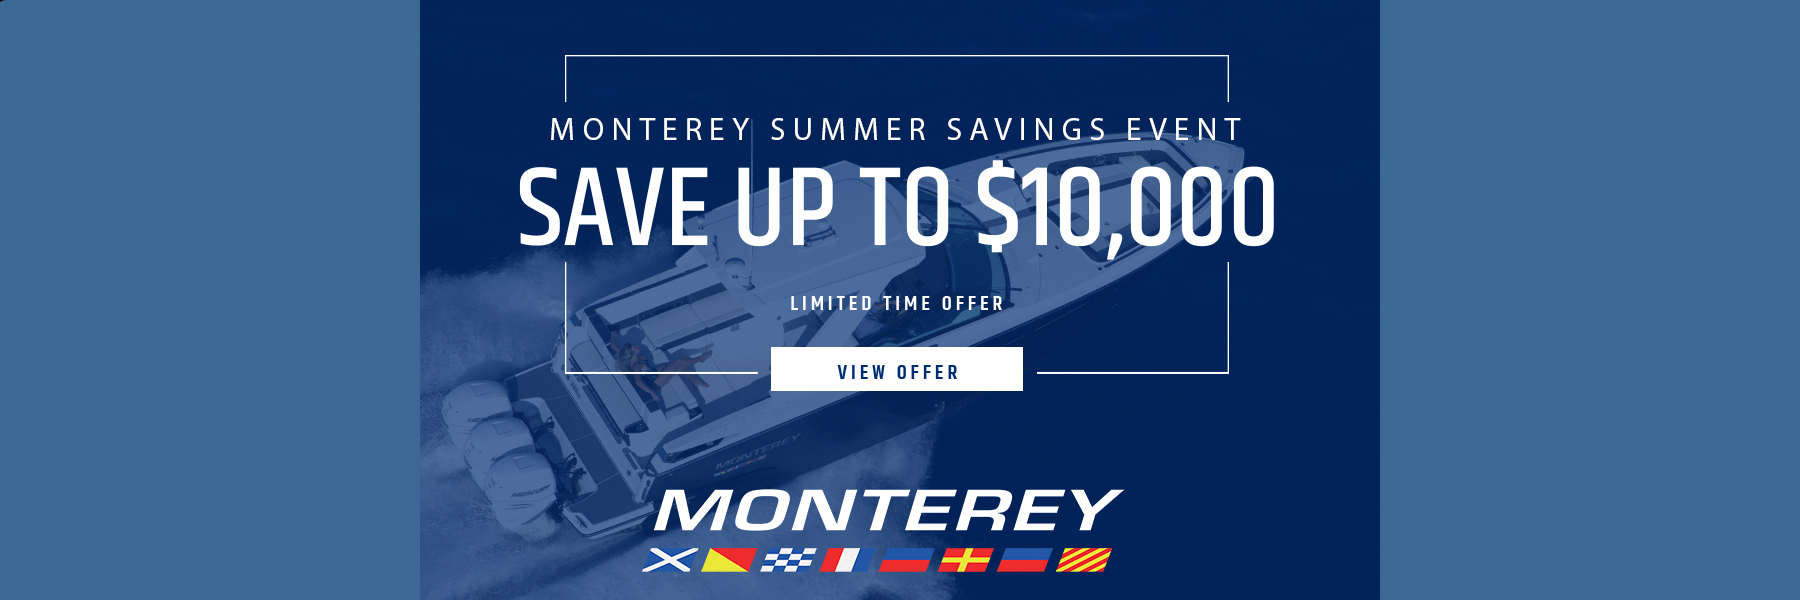 Save Up To $10K on a new Monterey boat!